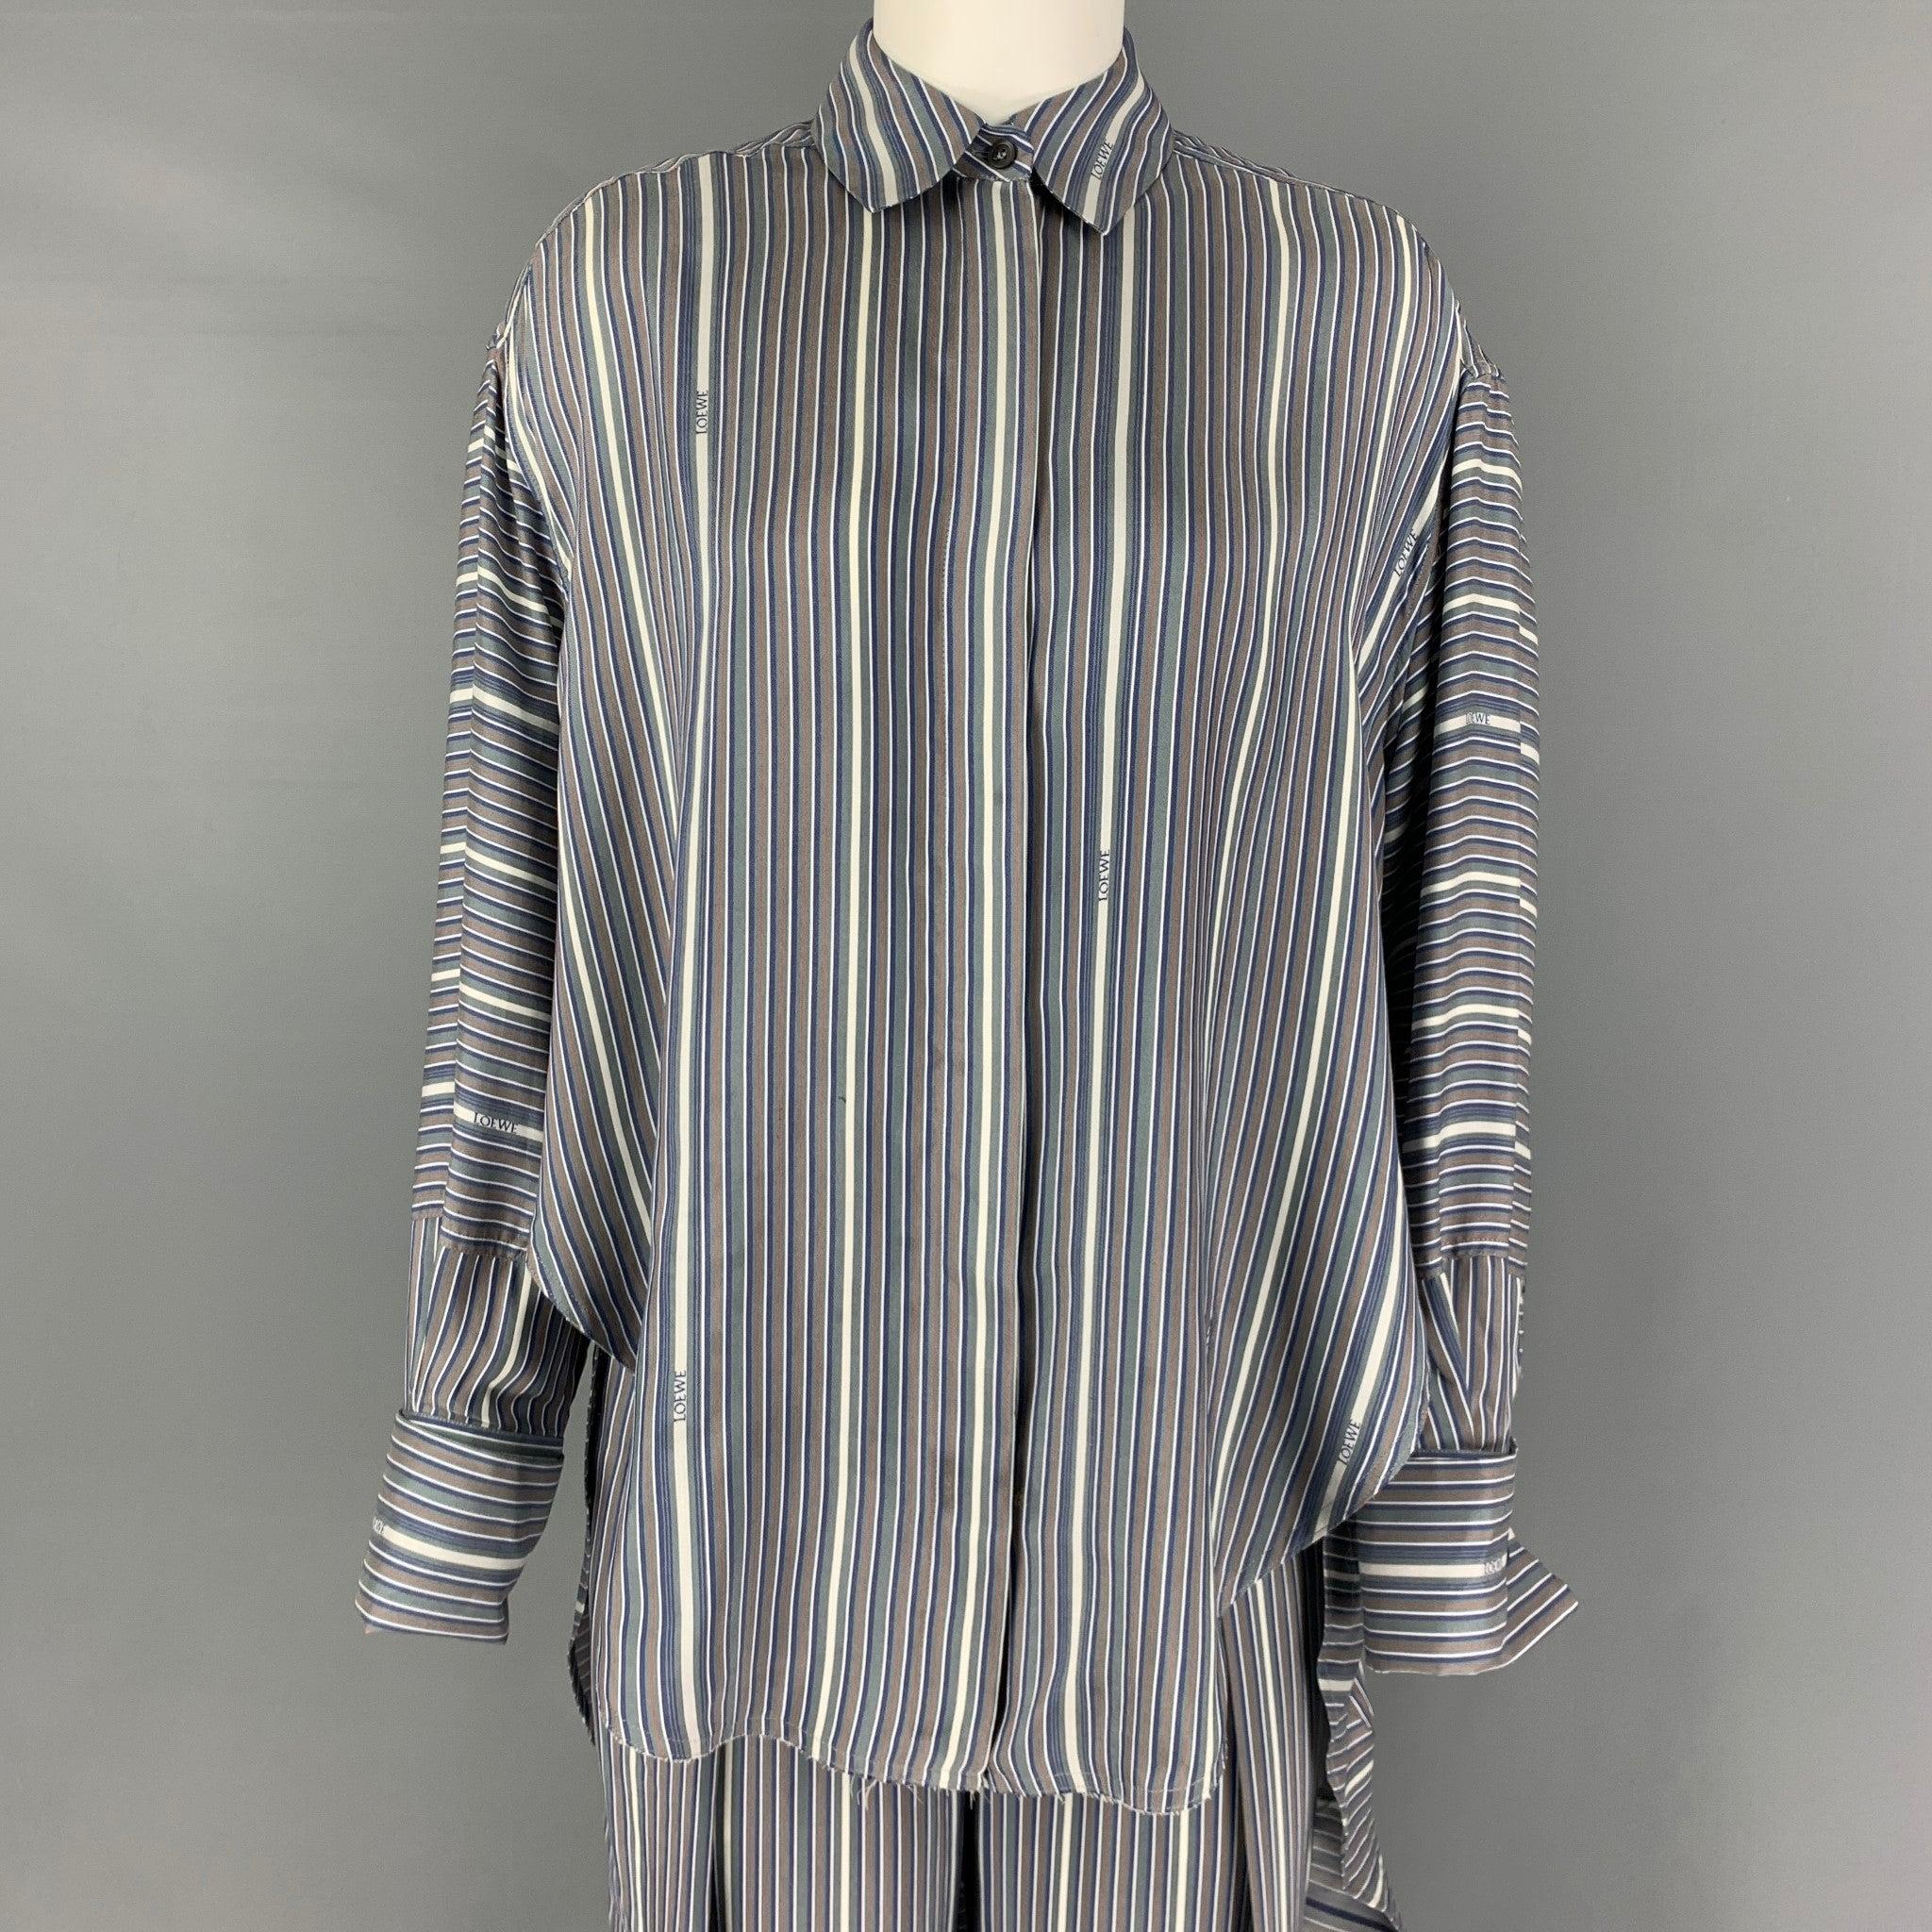 LOEWE set comes in a grey & blue striped silk featuring a trompe loeil high-low hem, pointed collar, loose fit,shirttail hem blouse and includes matching pull-on pleated balloon trousers. Made in Italy.
Excellent
Pre-Owned Condition. 

Marked:  